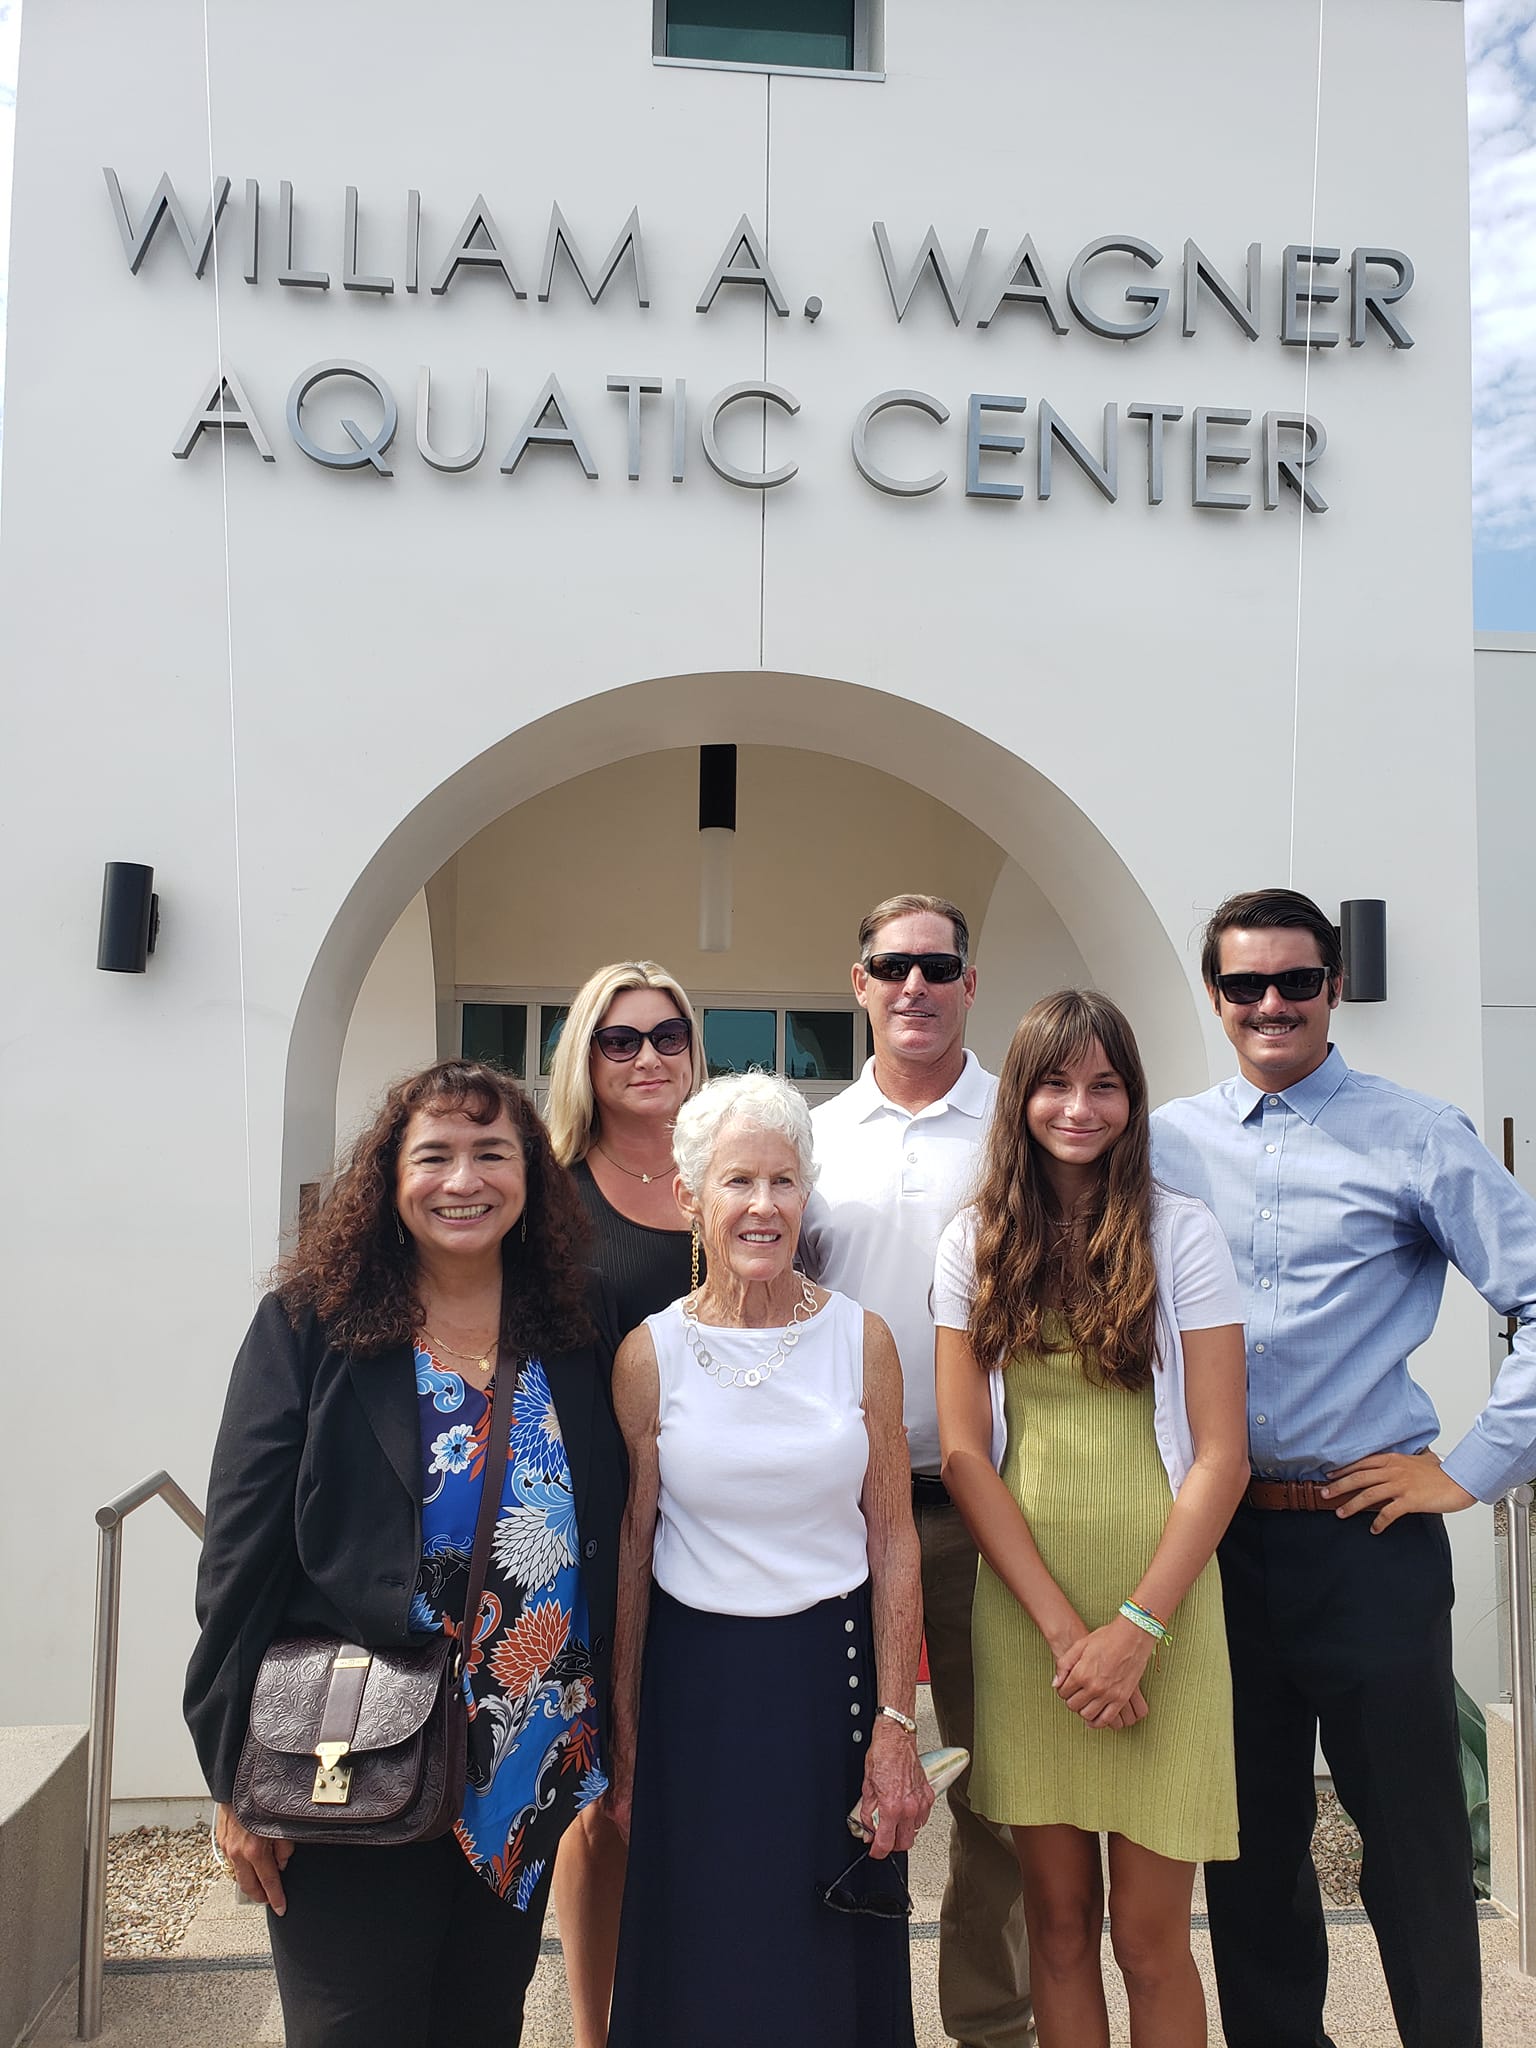 Mayor Esther Sanchez gathers with the Wagner family and community members to honor Willam “Coach Bill” Wagner’s renaming dedication ceremony of the former El Corazon Aquatics Center. Photo courtesy of Mayor Esther Sanchez